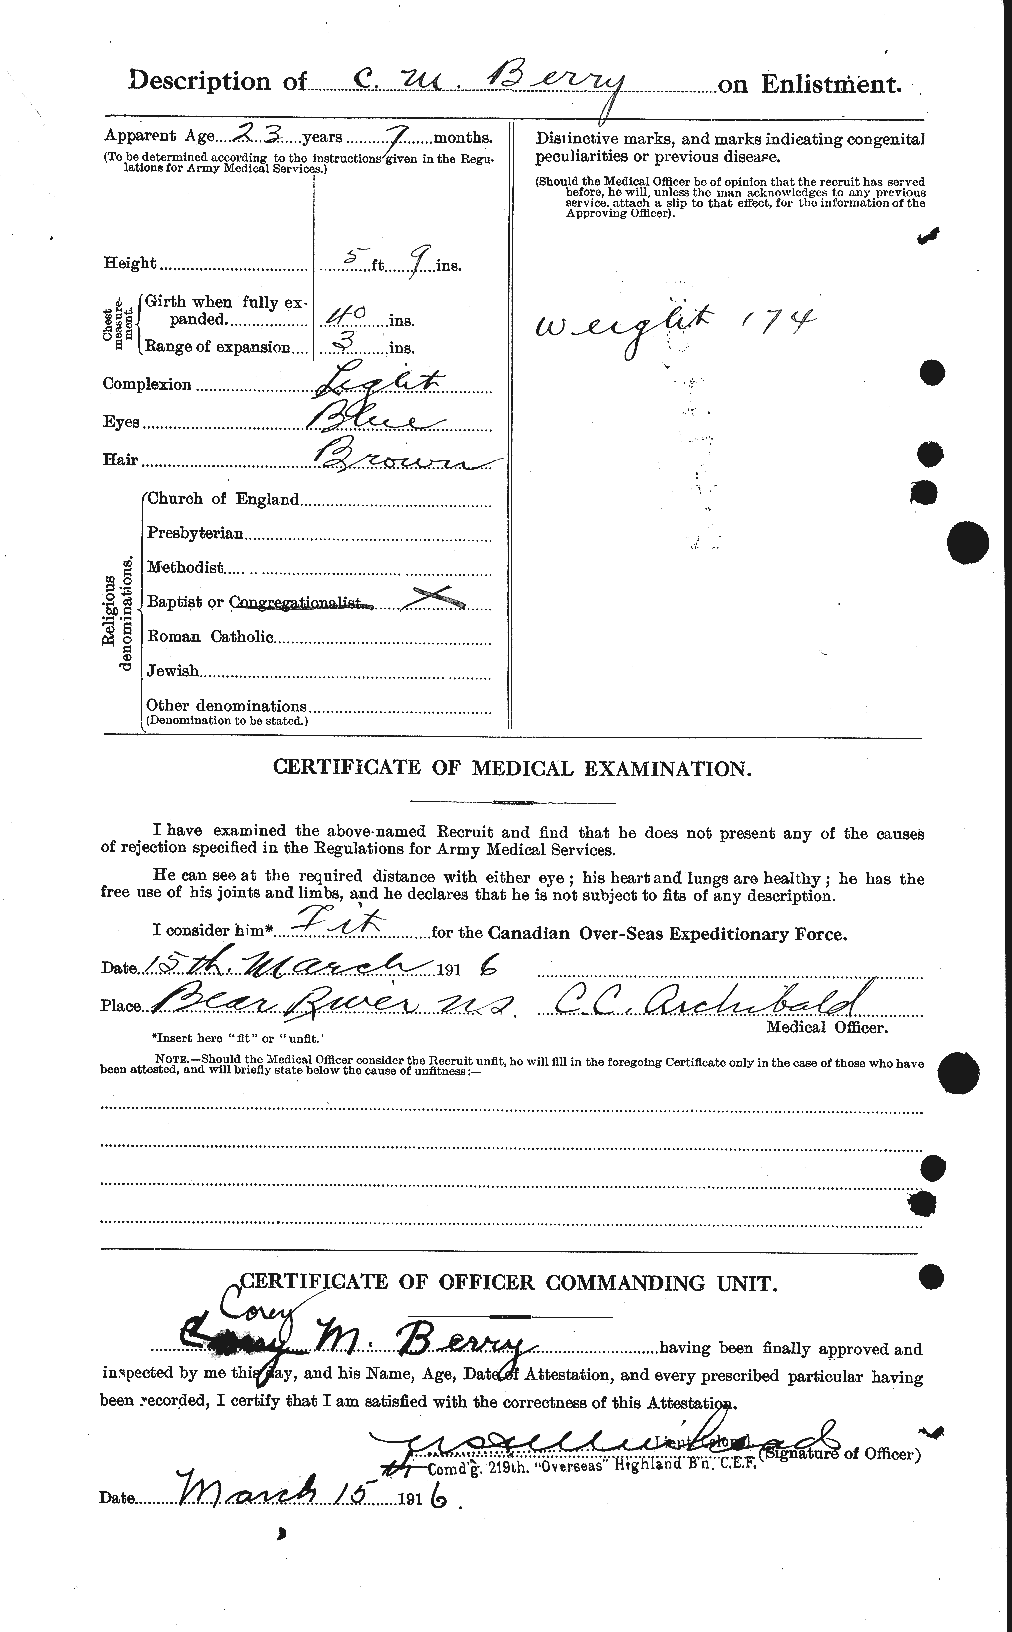 Personnel Records of the First World War - CEF 240833b